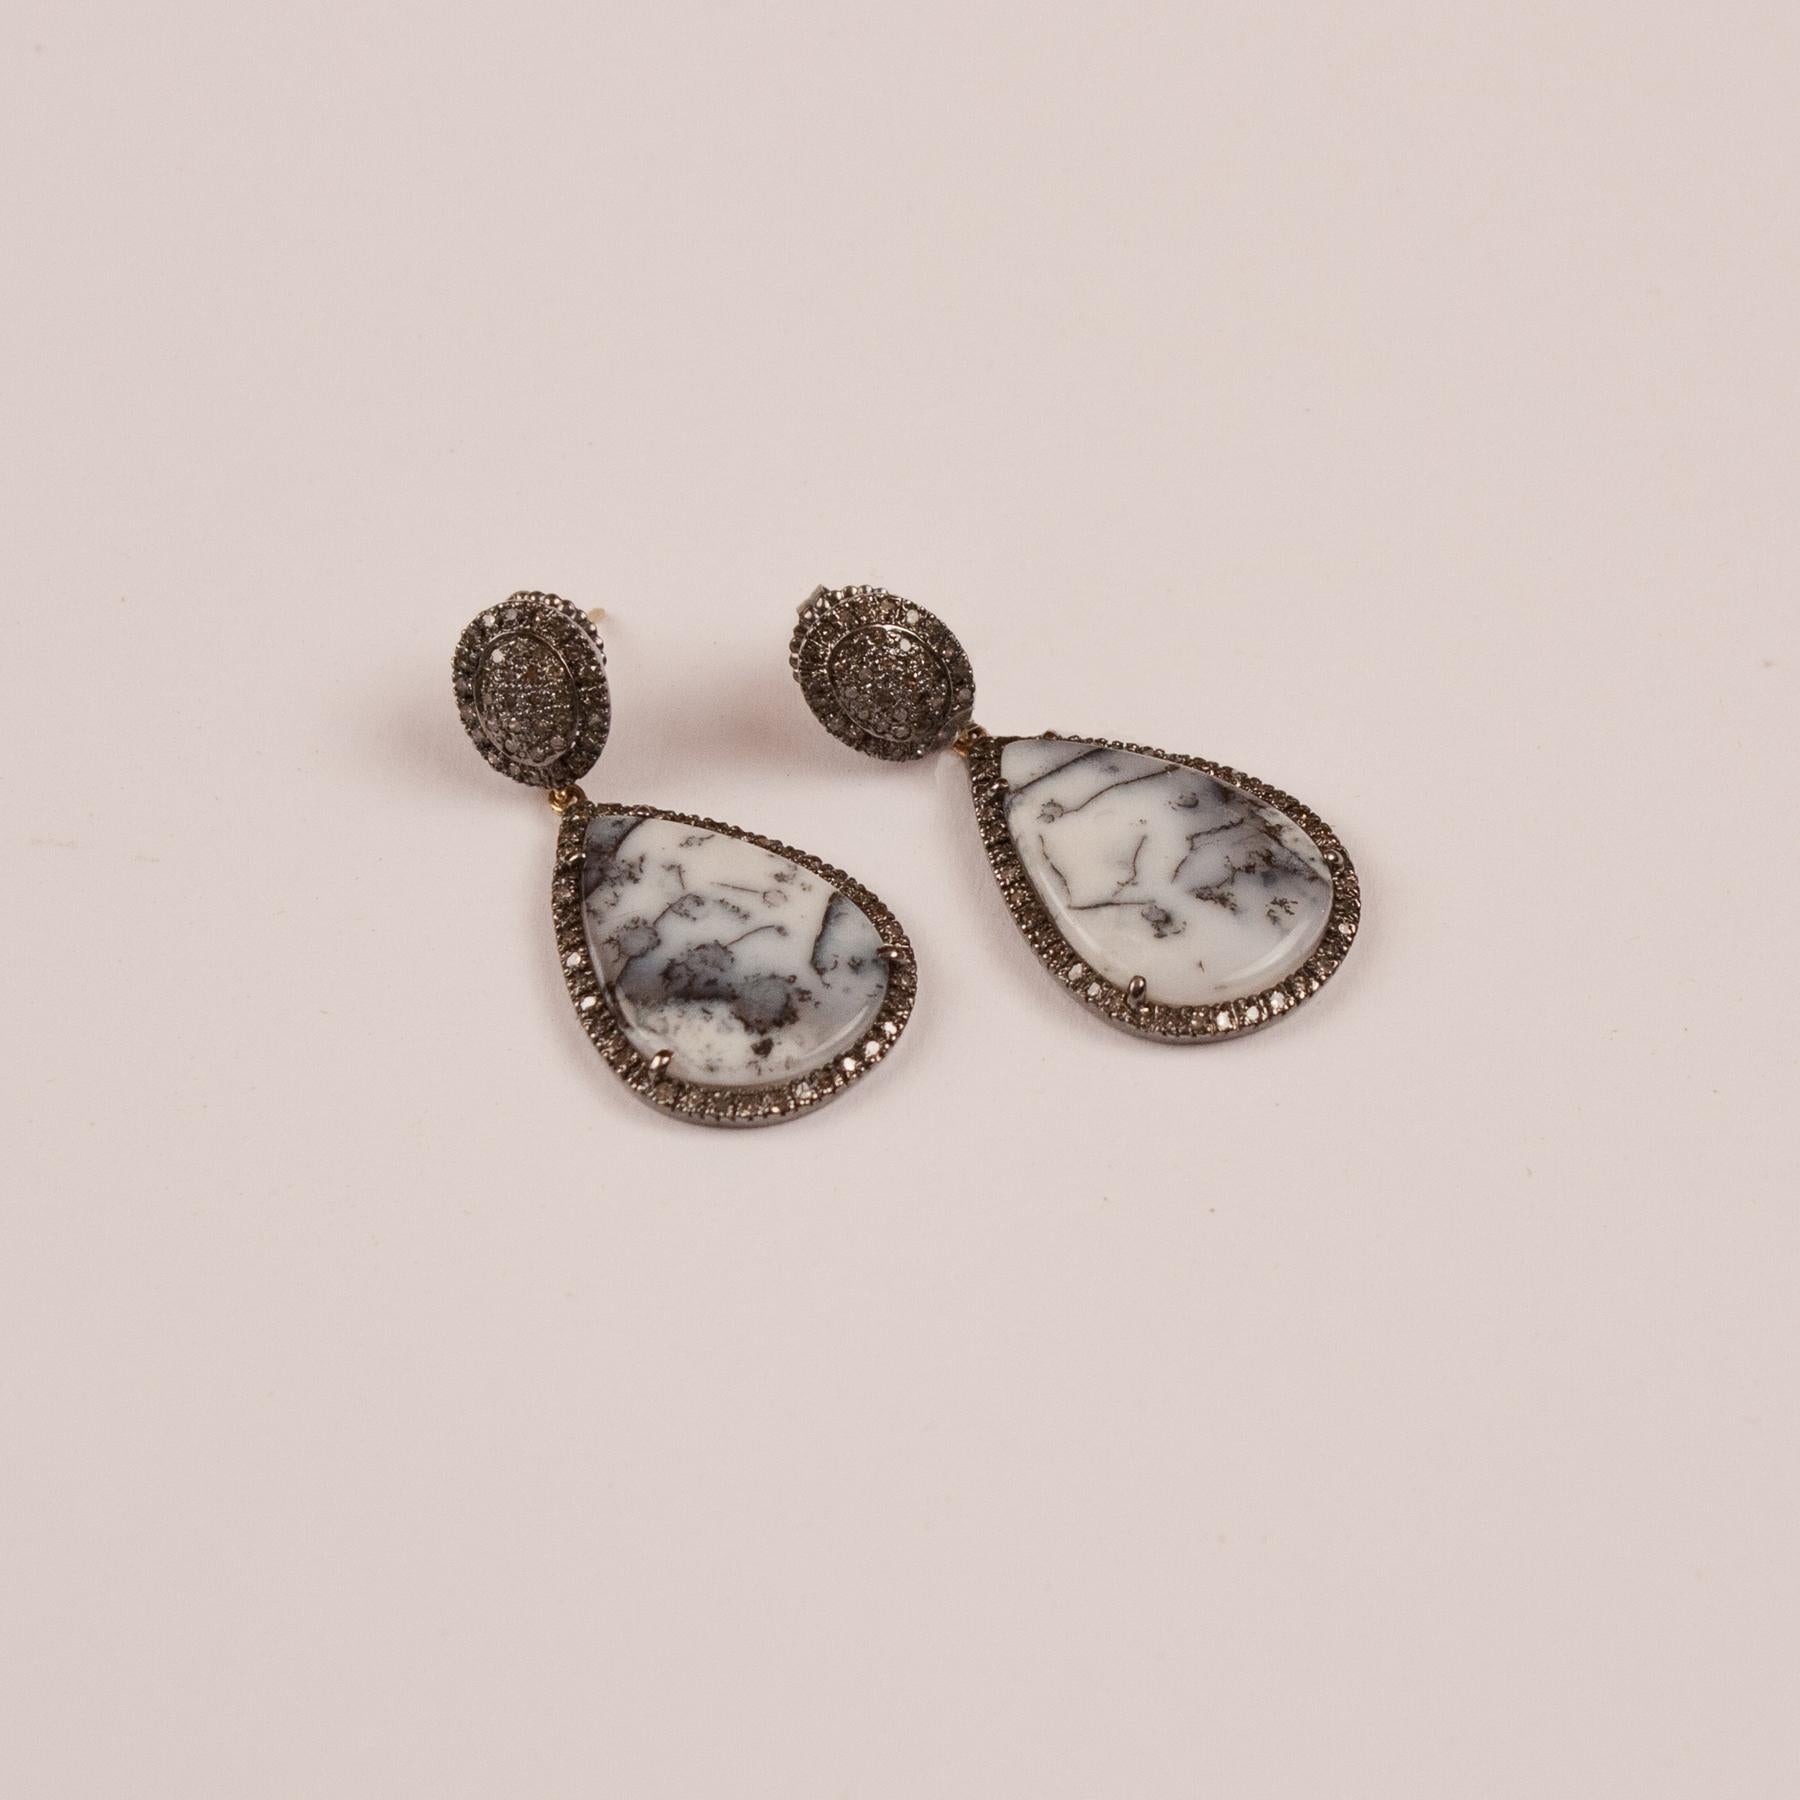 Moss agate drops, framed by pave set diamonds, suspend from round diamond studs. The cabochon agate slices in these dangle earrings have beautiful inclusions and a subtle palette.
Agate: 20.90 ct
Diamond: 1.65 ct  